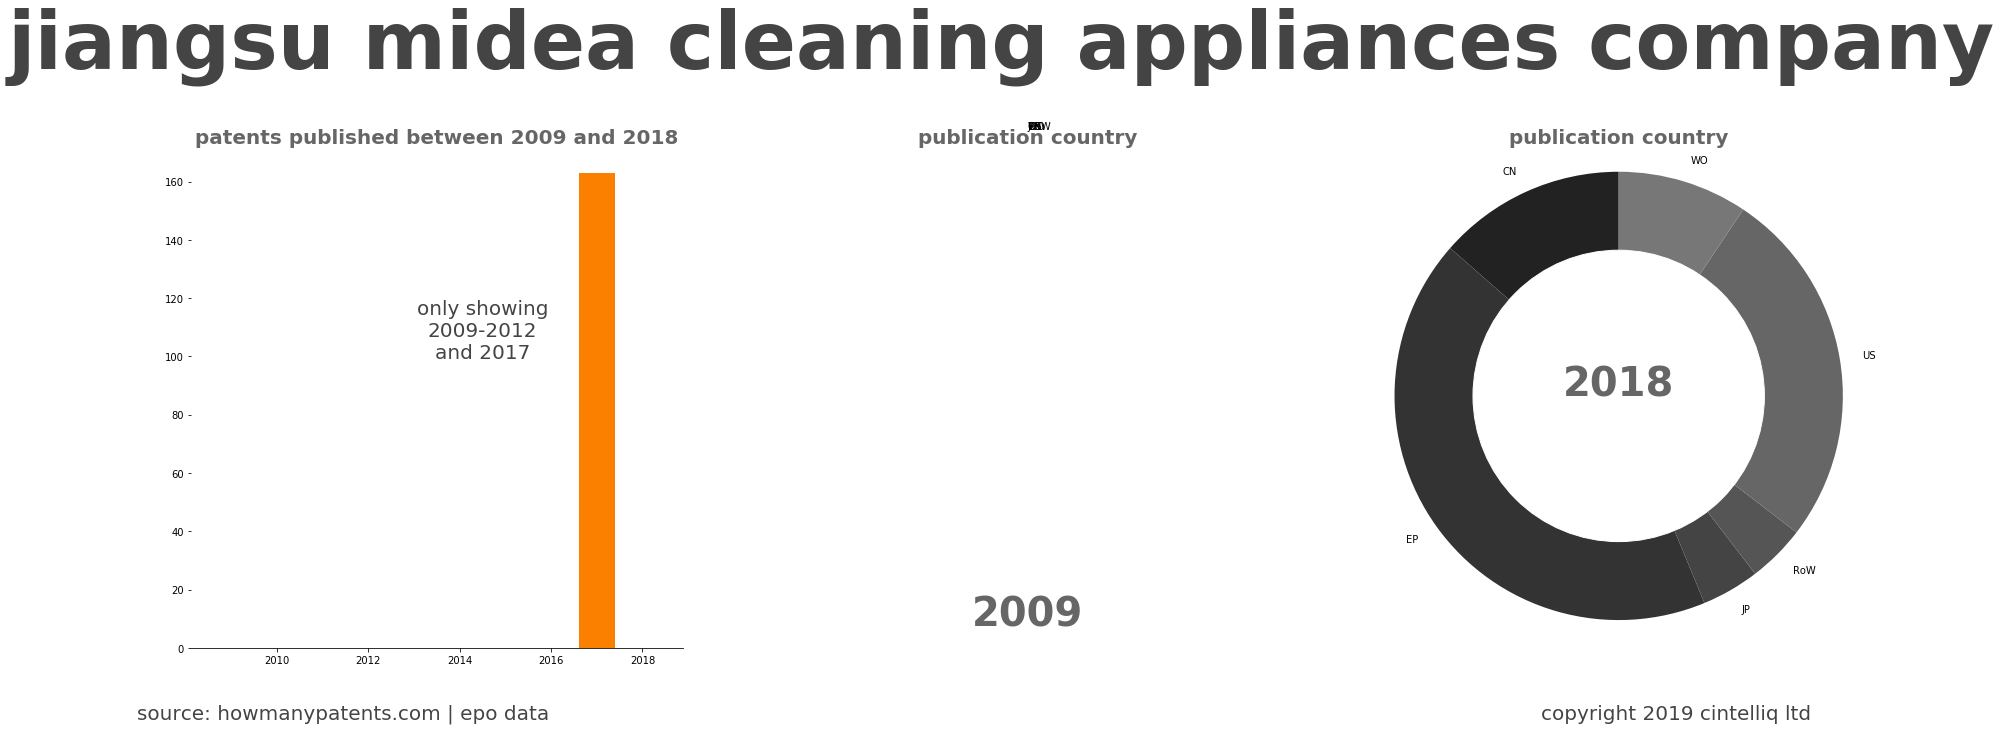 summary of patents for Jiangsu Midea Cleaning Appliances Company